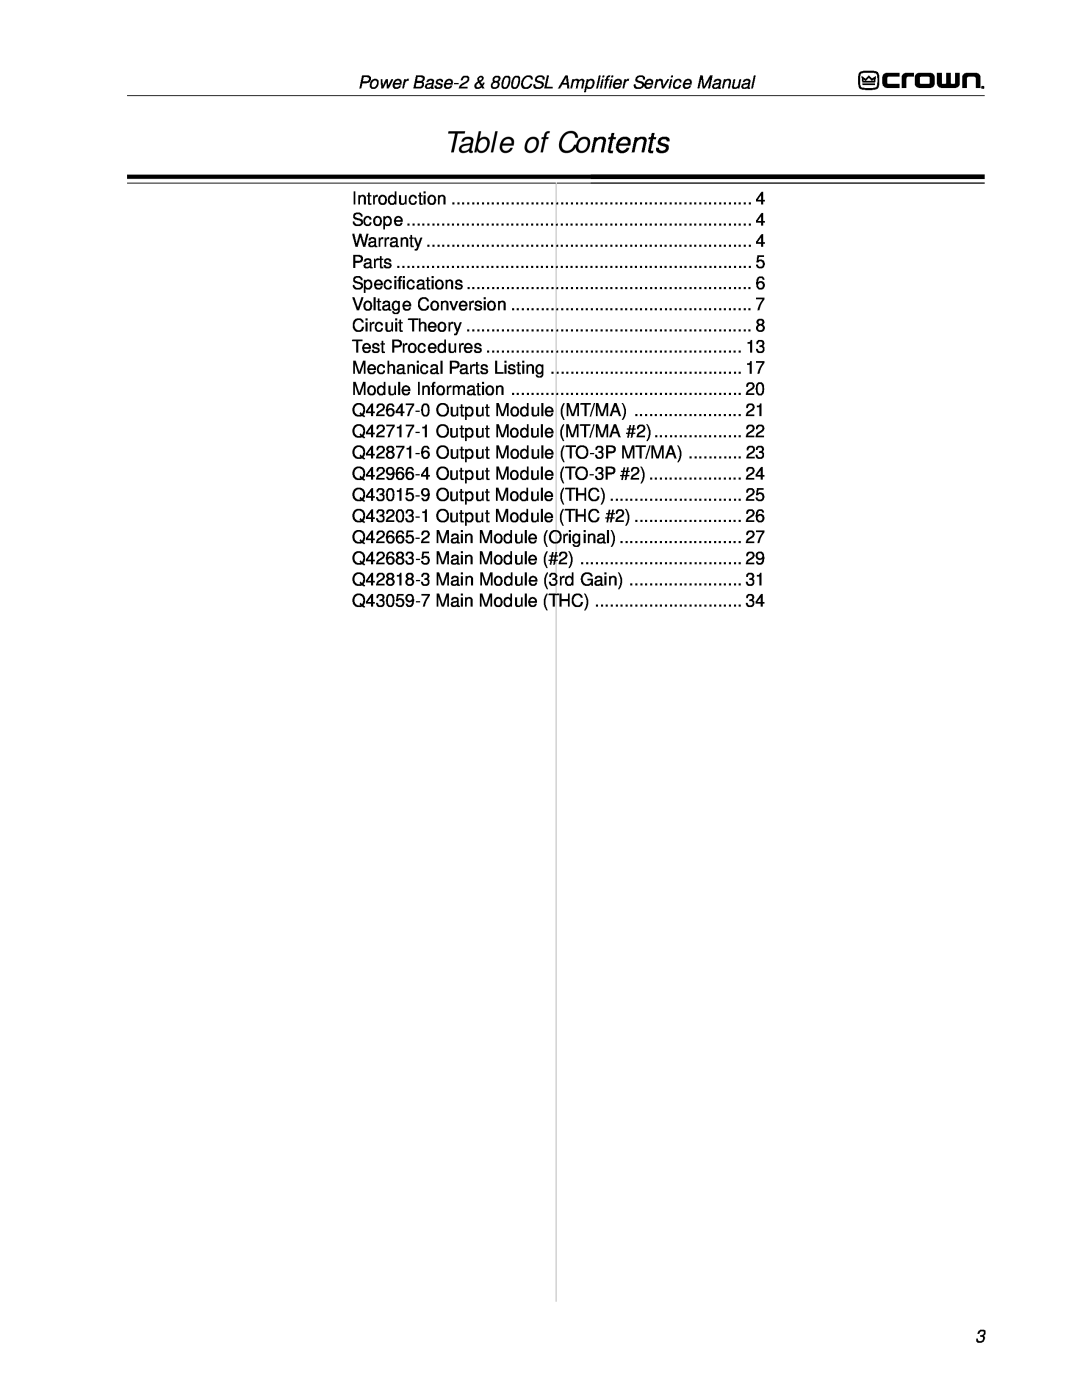 Crown Audio 800CSL service manual Table of Contents 